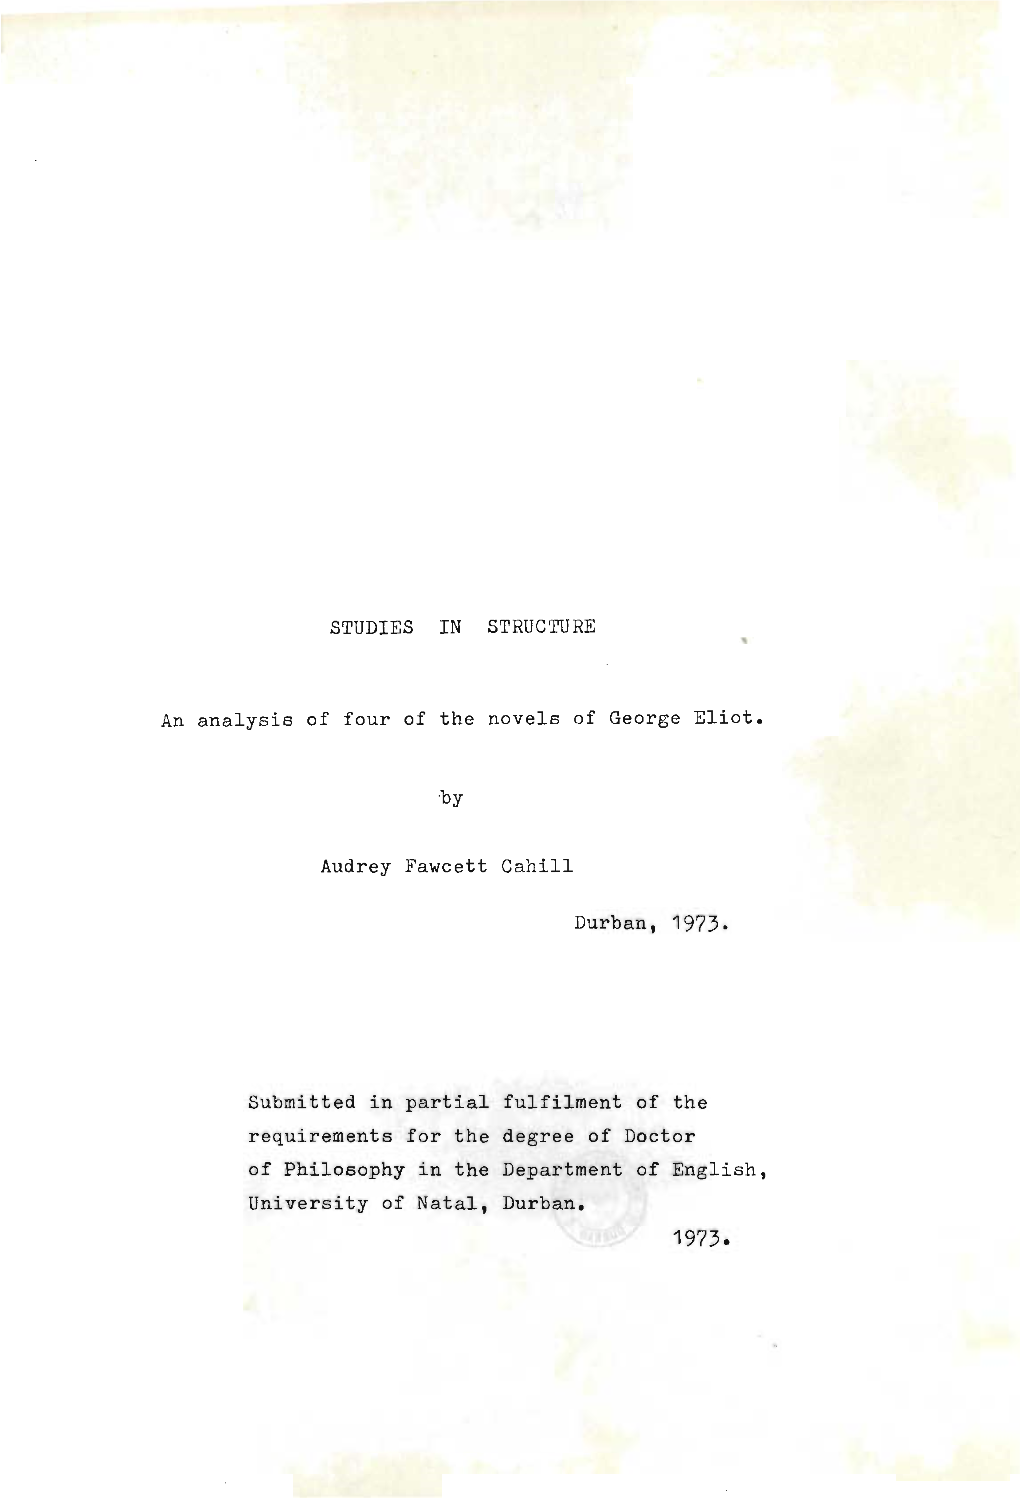 STUDIES in STRUCTURE an Analysis of Four of the Novels of George Eliot. Audrey Fawcett Cahill Durban, 1973. Submitted in Partial